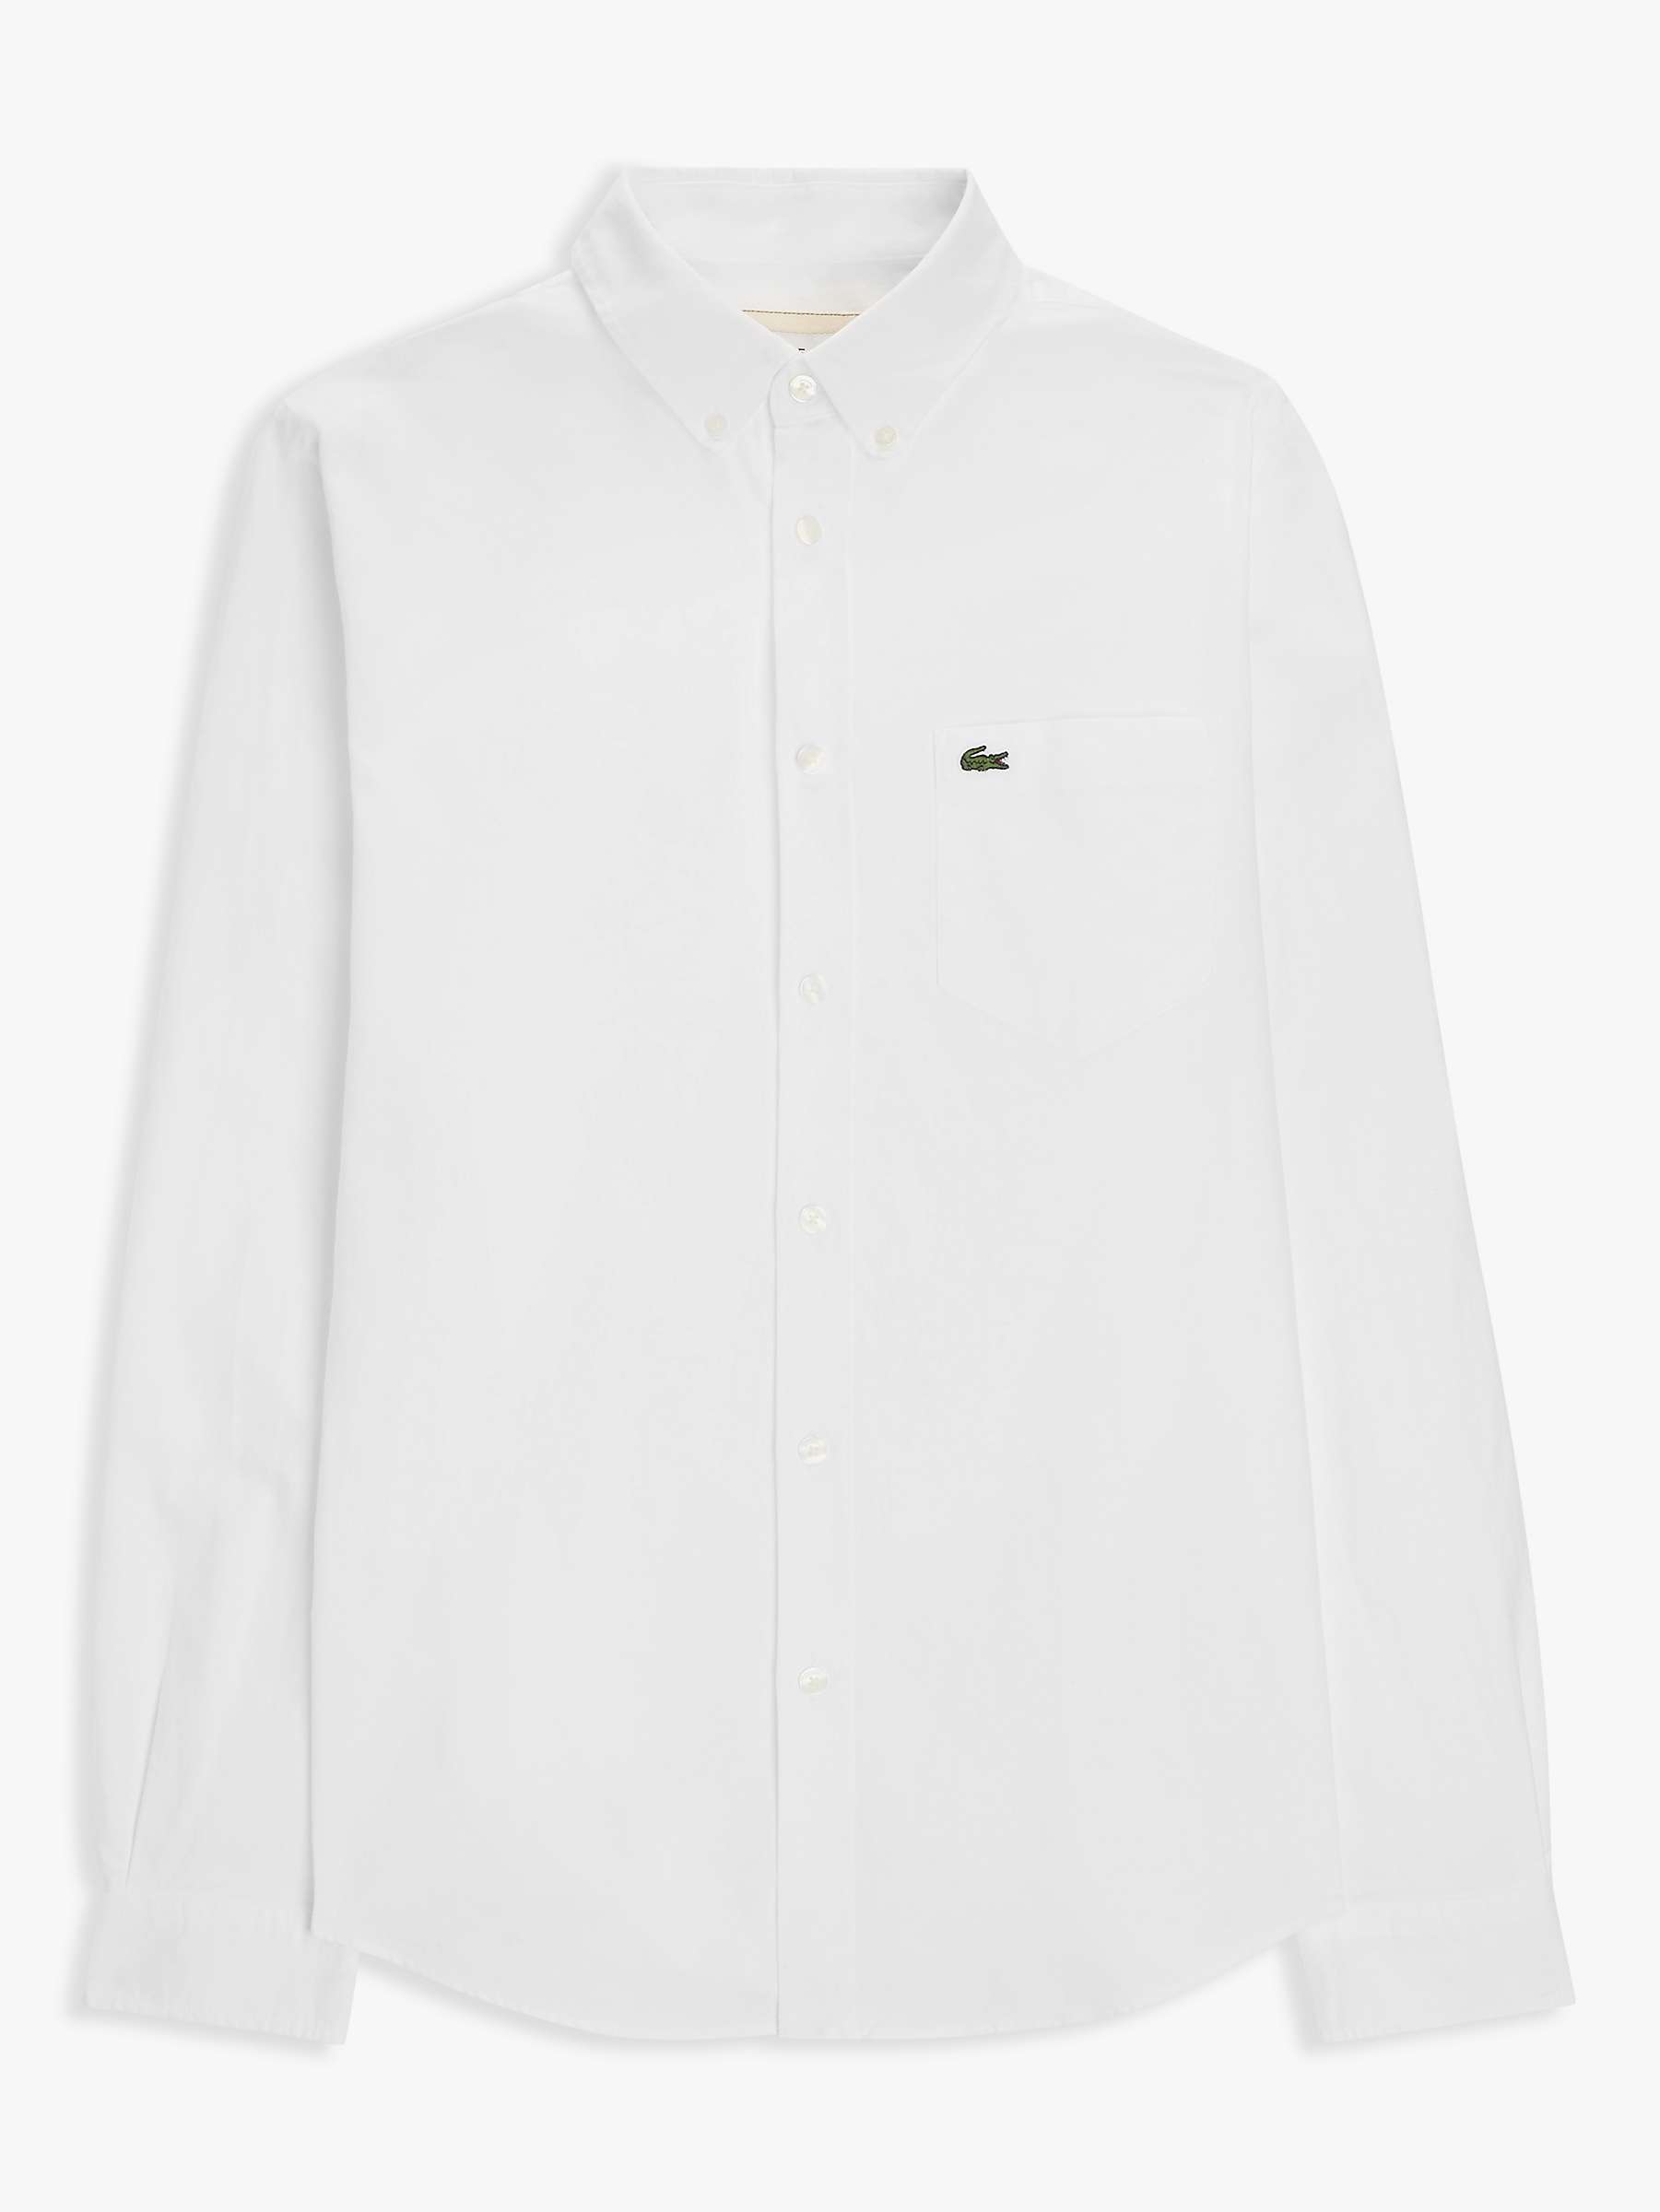 Buy Lacoste Buttoned Collar Oxford Shirt, C001 Online at johnlewis.com